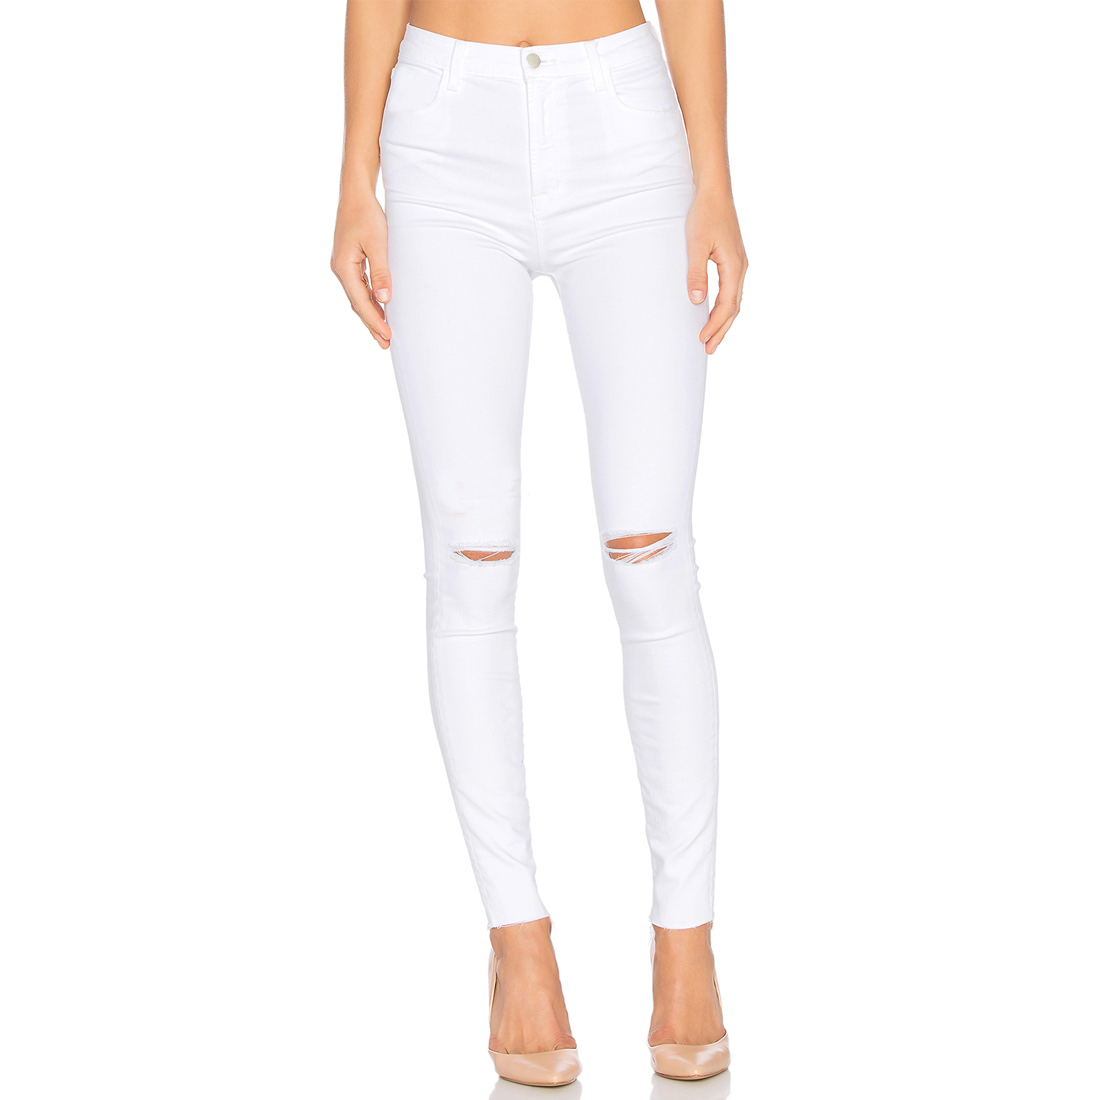 Buy XEE Women White Skinny Fit Ripped Jeans Online - Get 62% Off